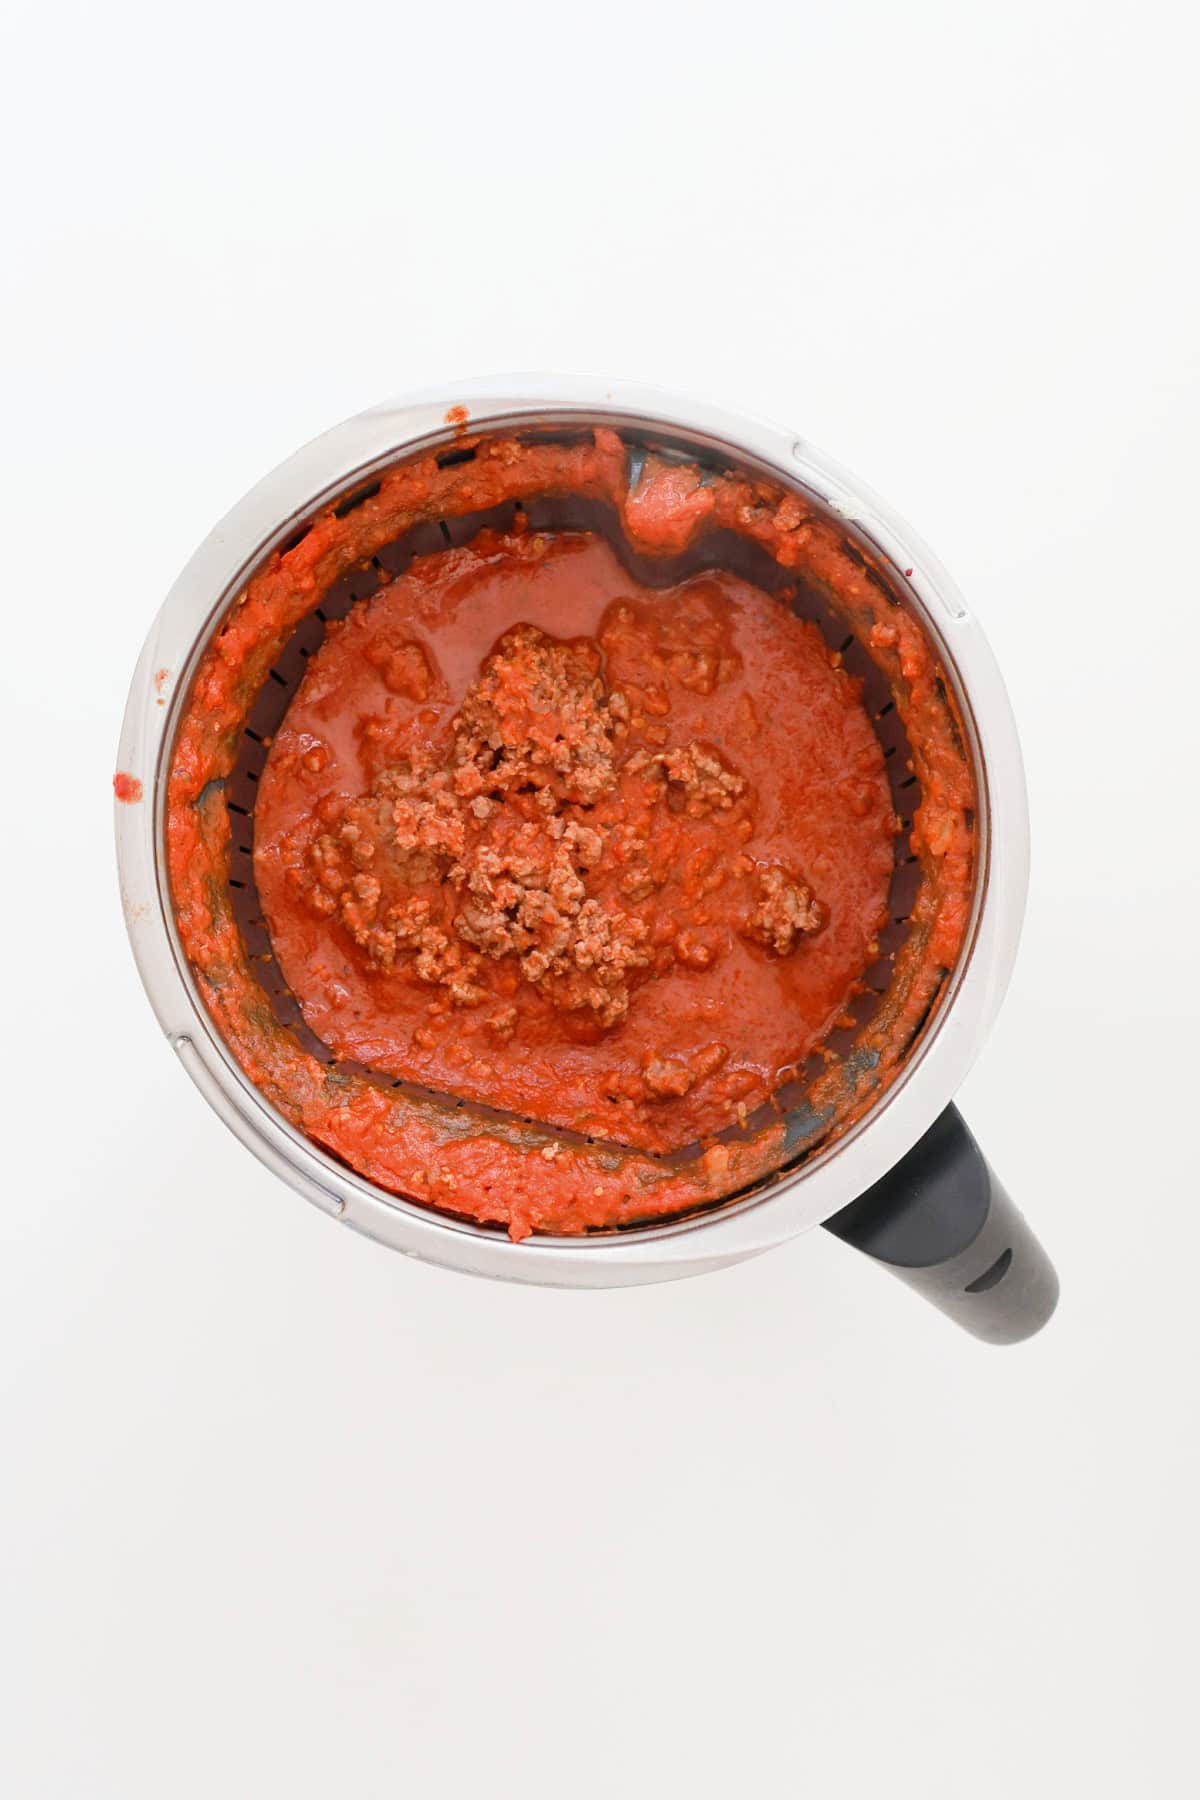 Beef and vegetable sauce ingredients in a thermomix bowl.